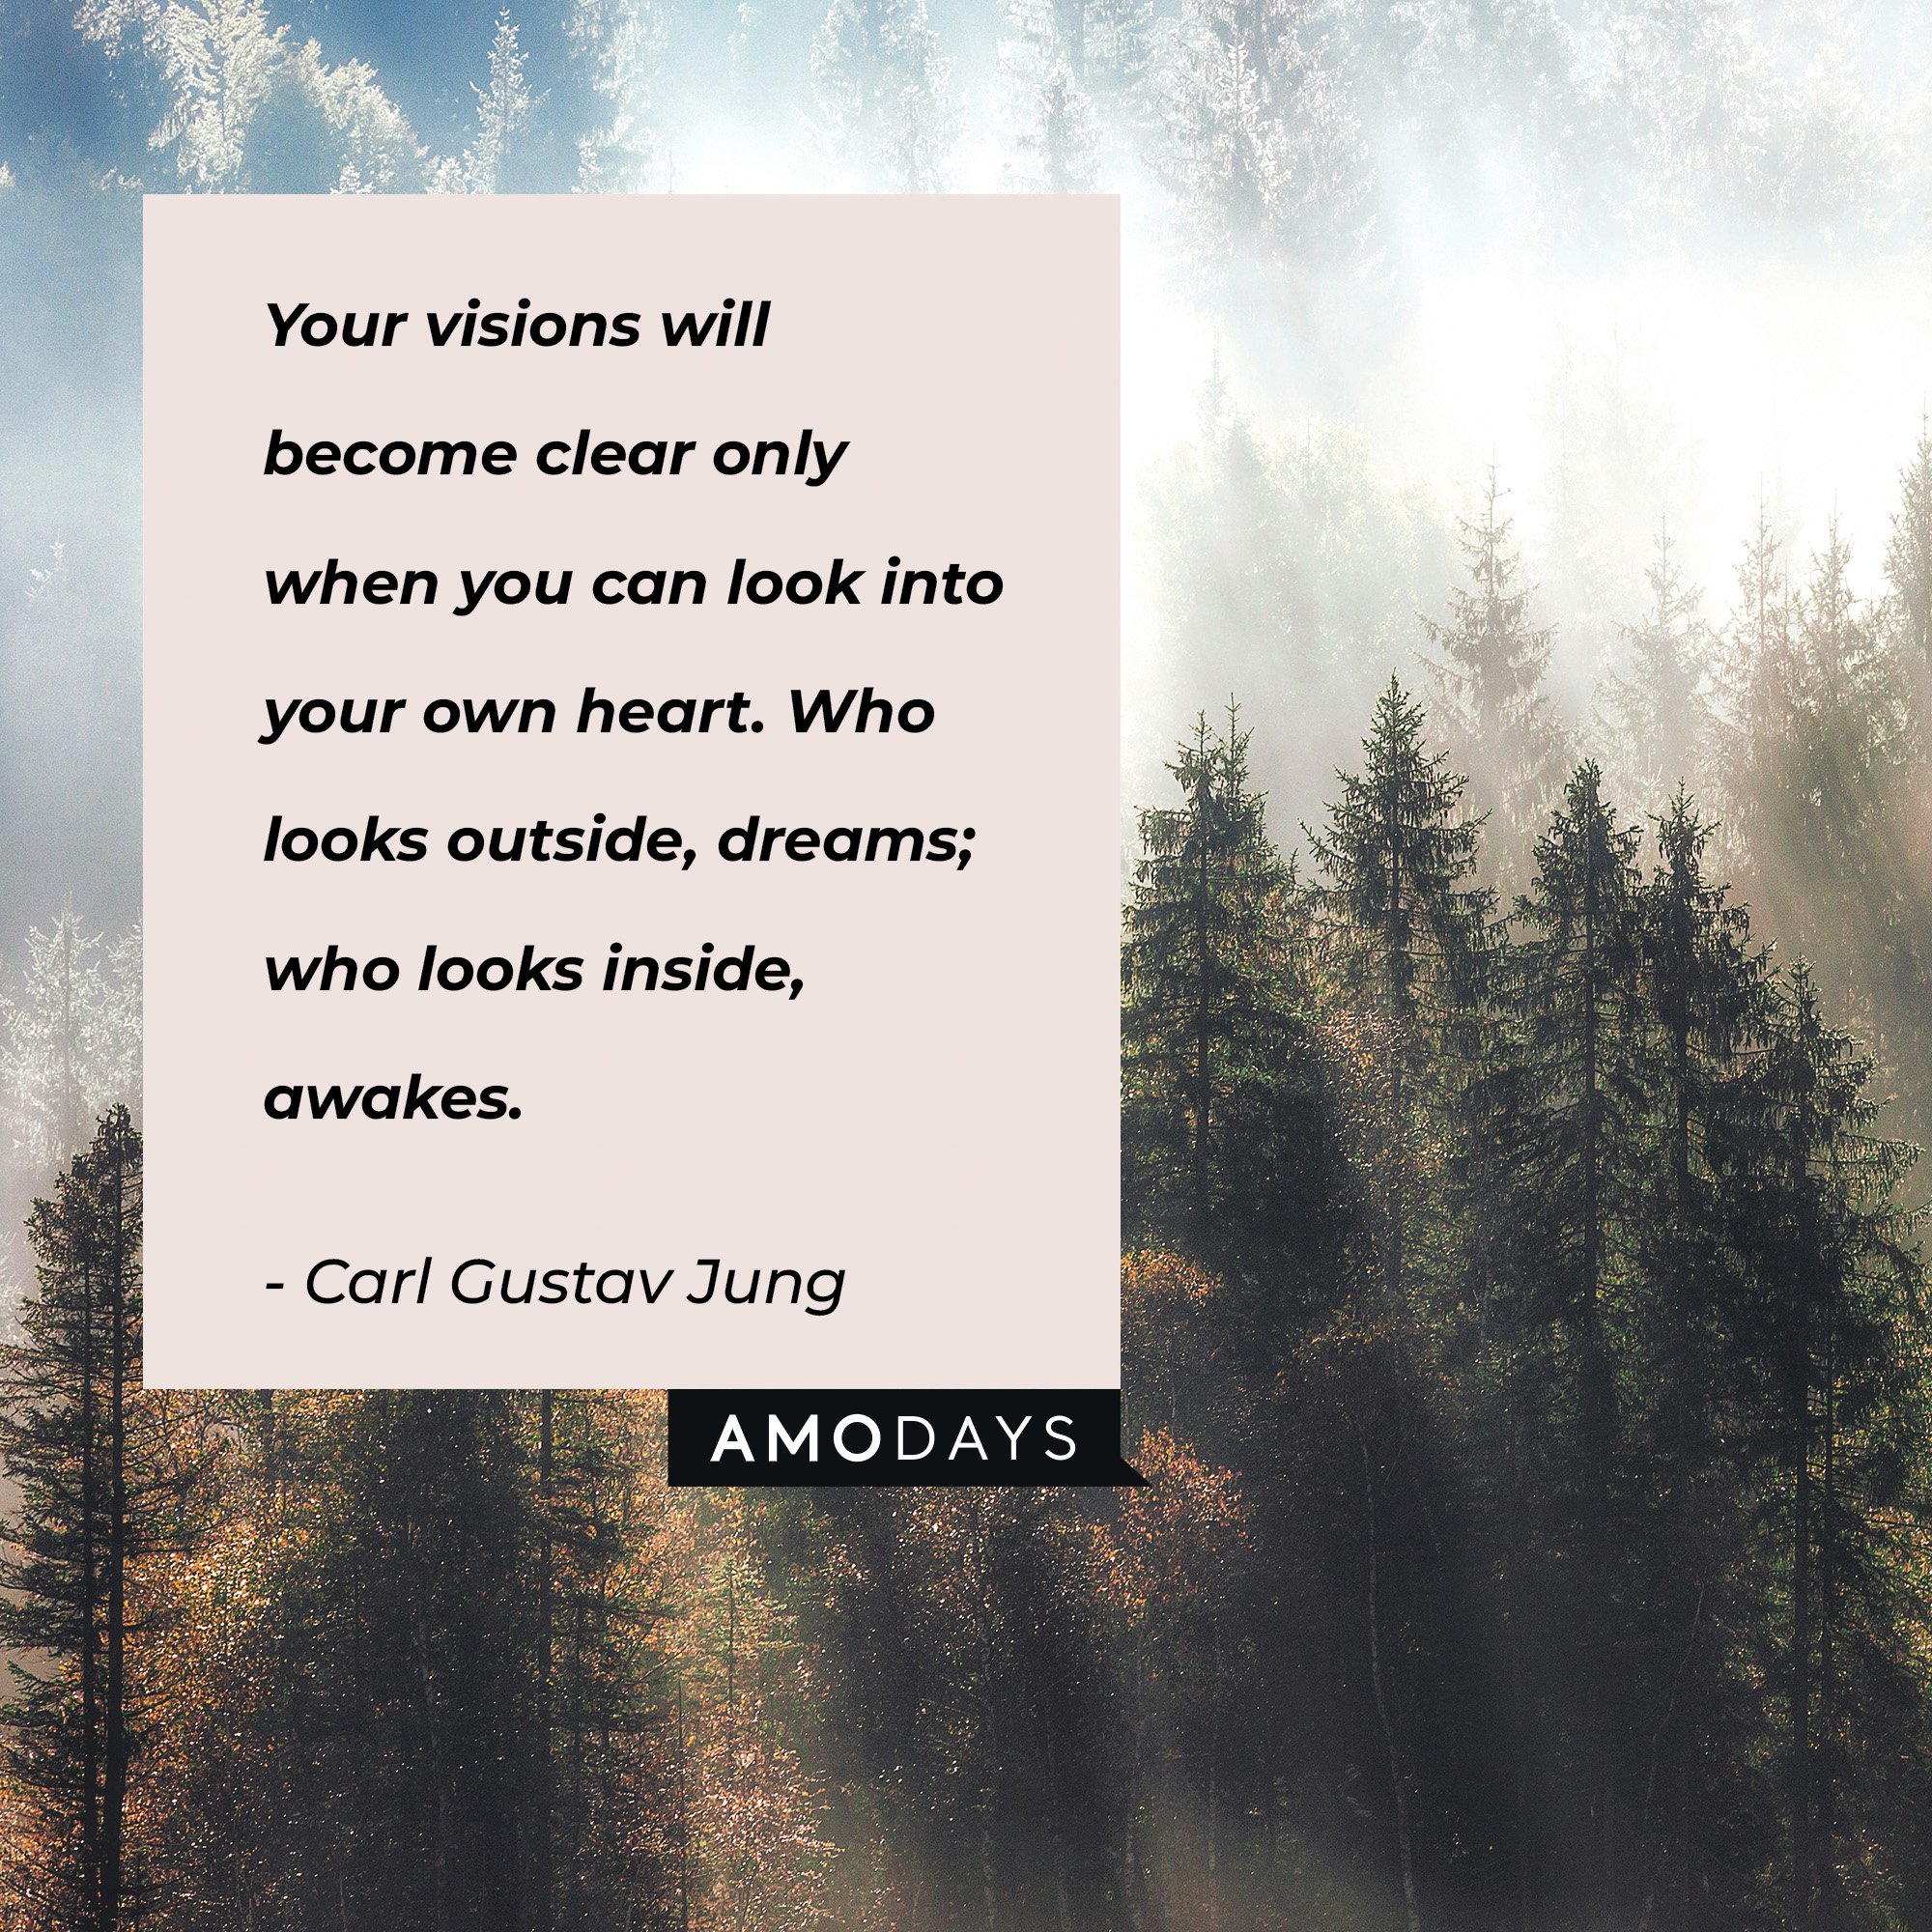 Carl Gustav Jung's quote: “Your visions will become clear only when you can look into your own heart. Who looks outside, dreams; who looks inside, awakes.” | Image: AmoDays